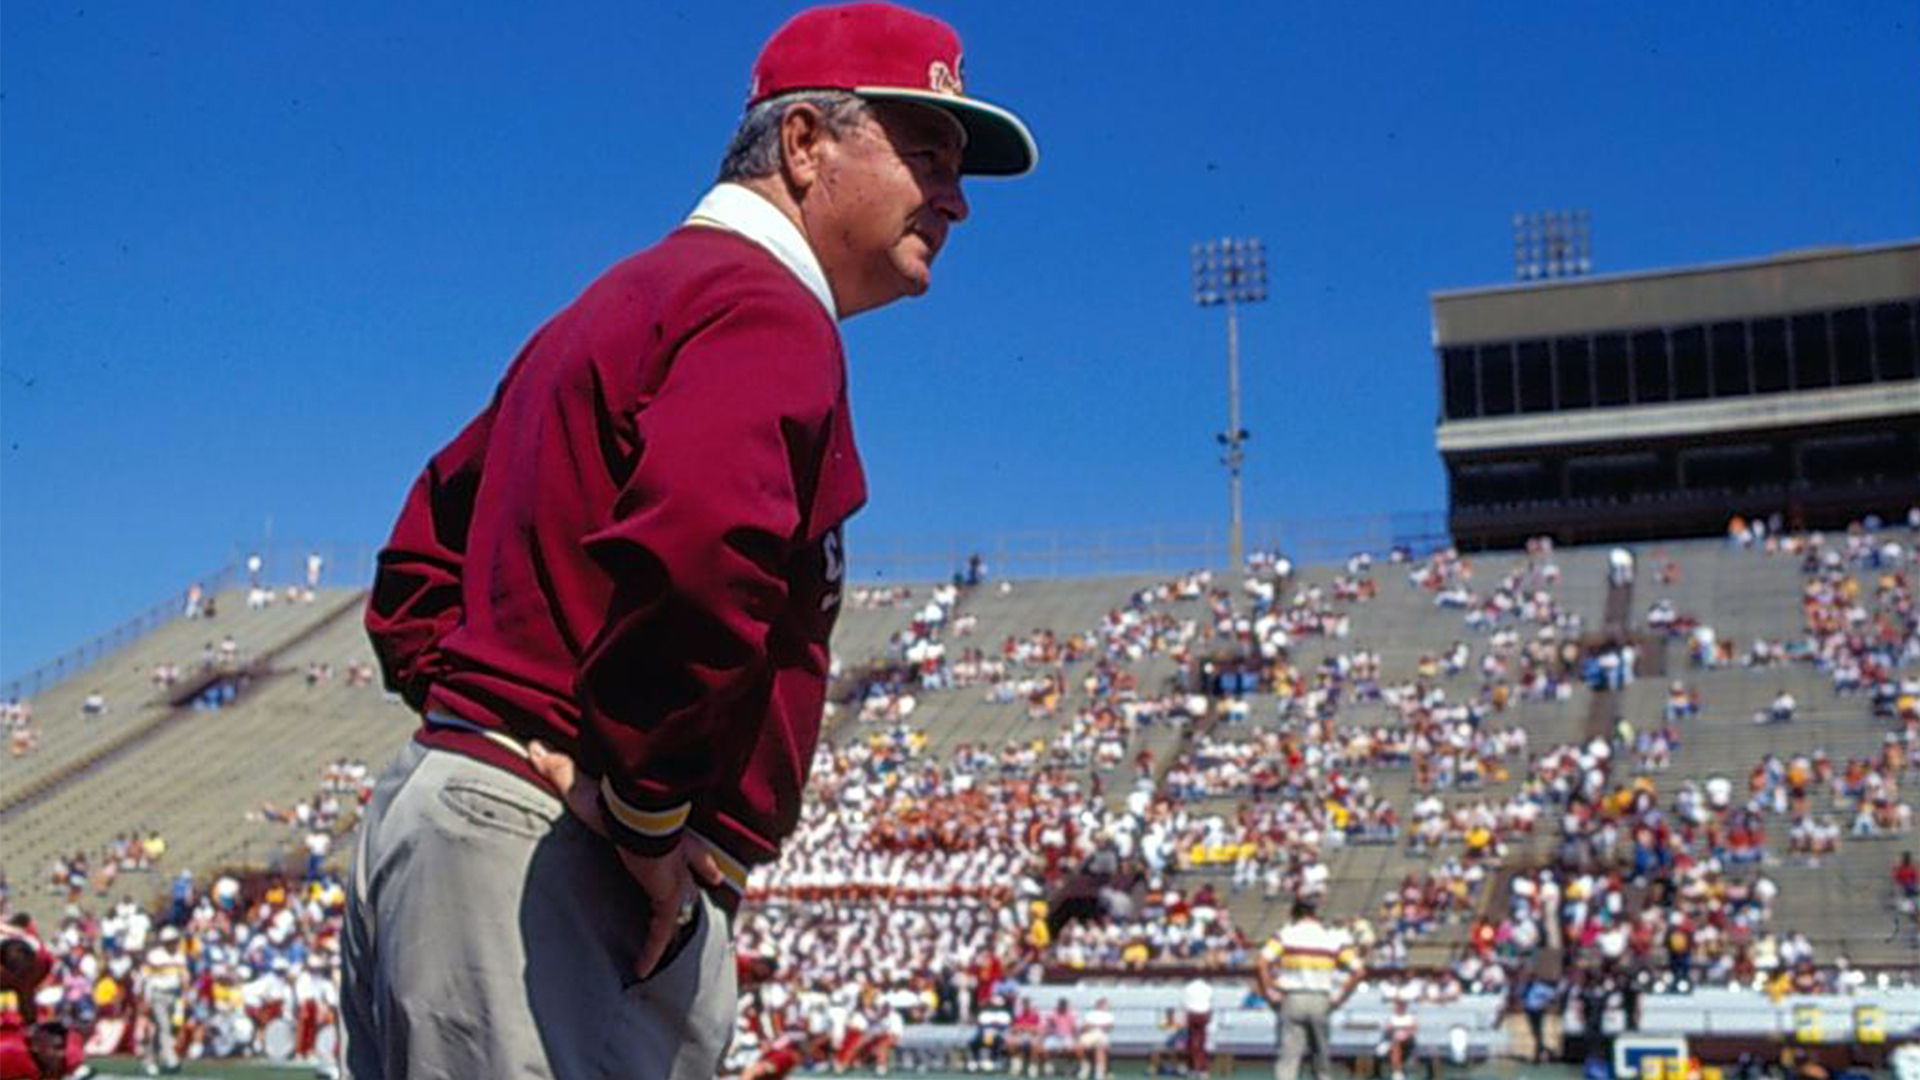 Who is Bobby Bowden?